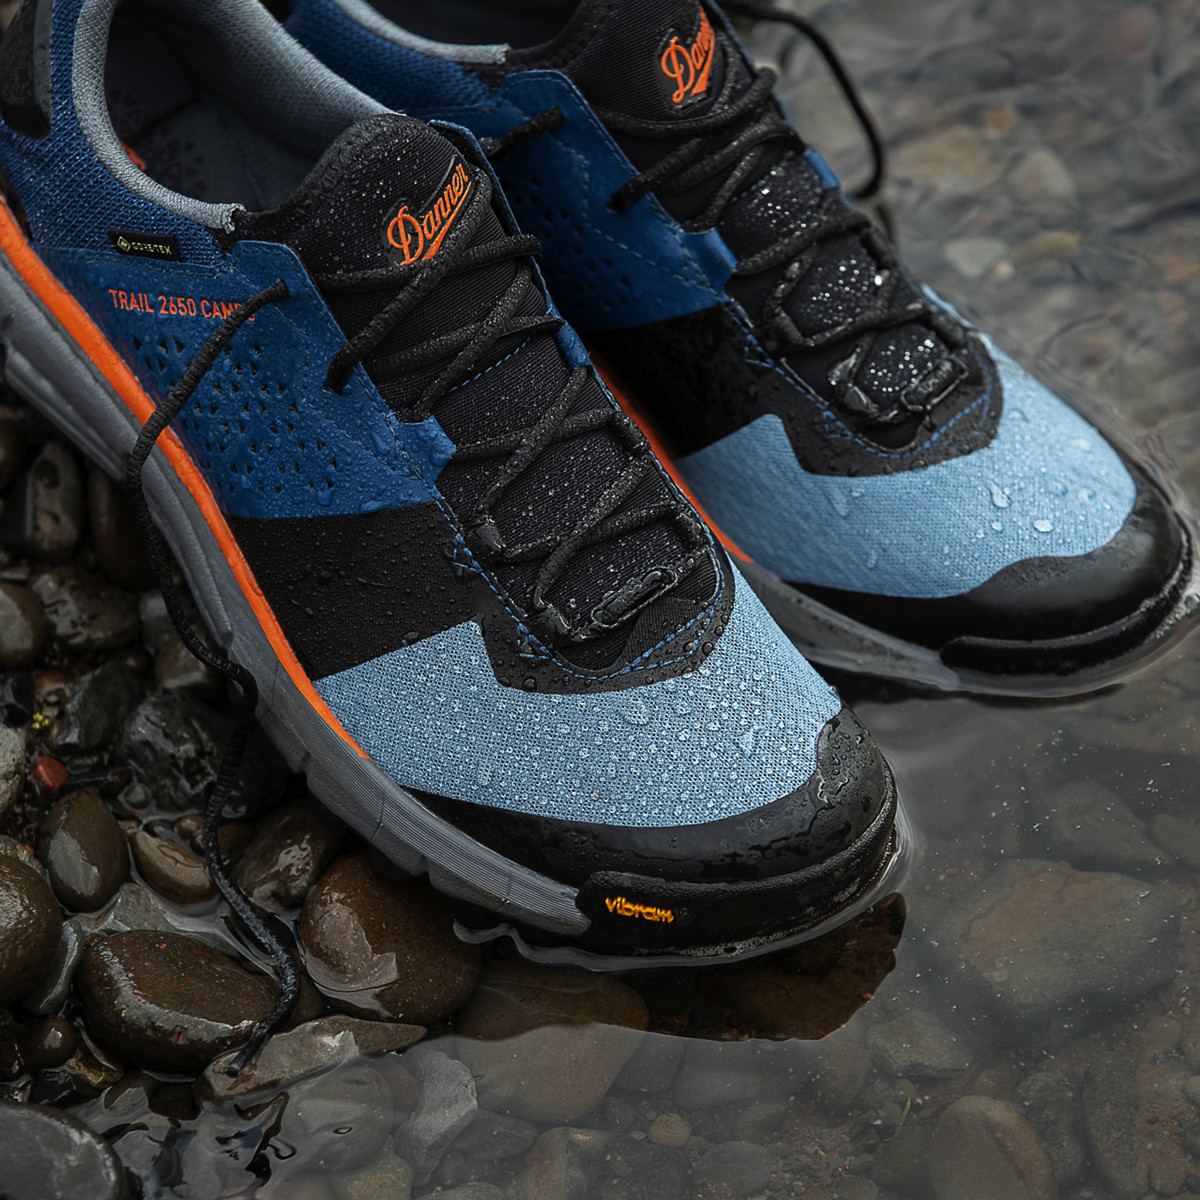 Jed Doane reviews the Danner Trail 2650 Campo GTX for BLISTER.